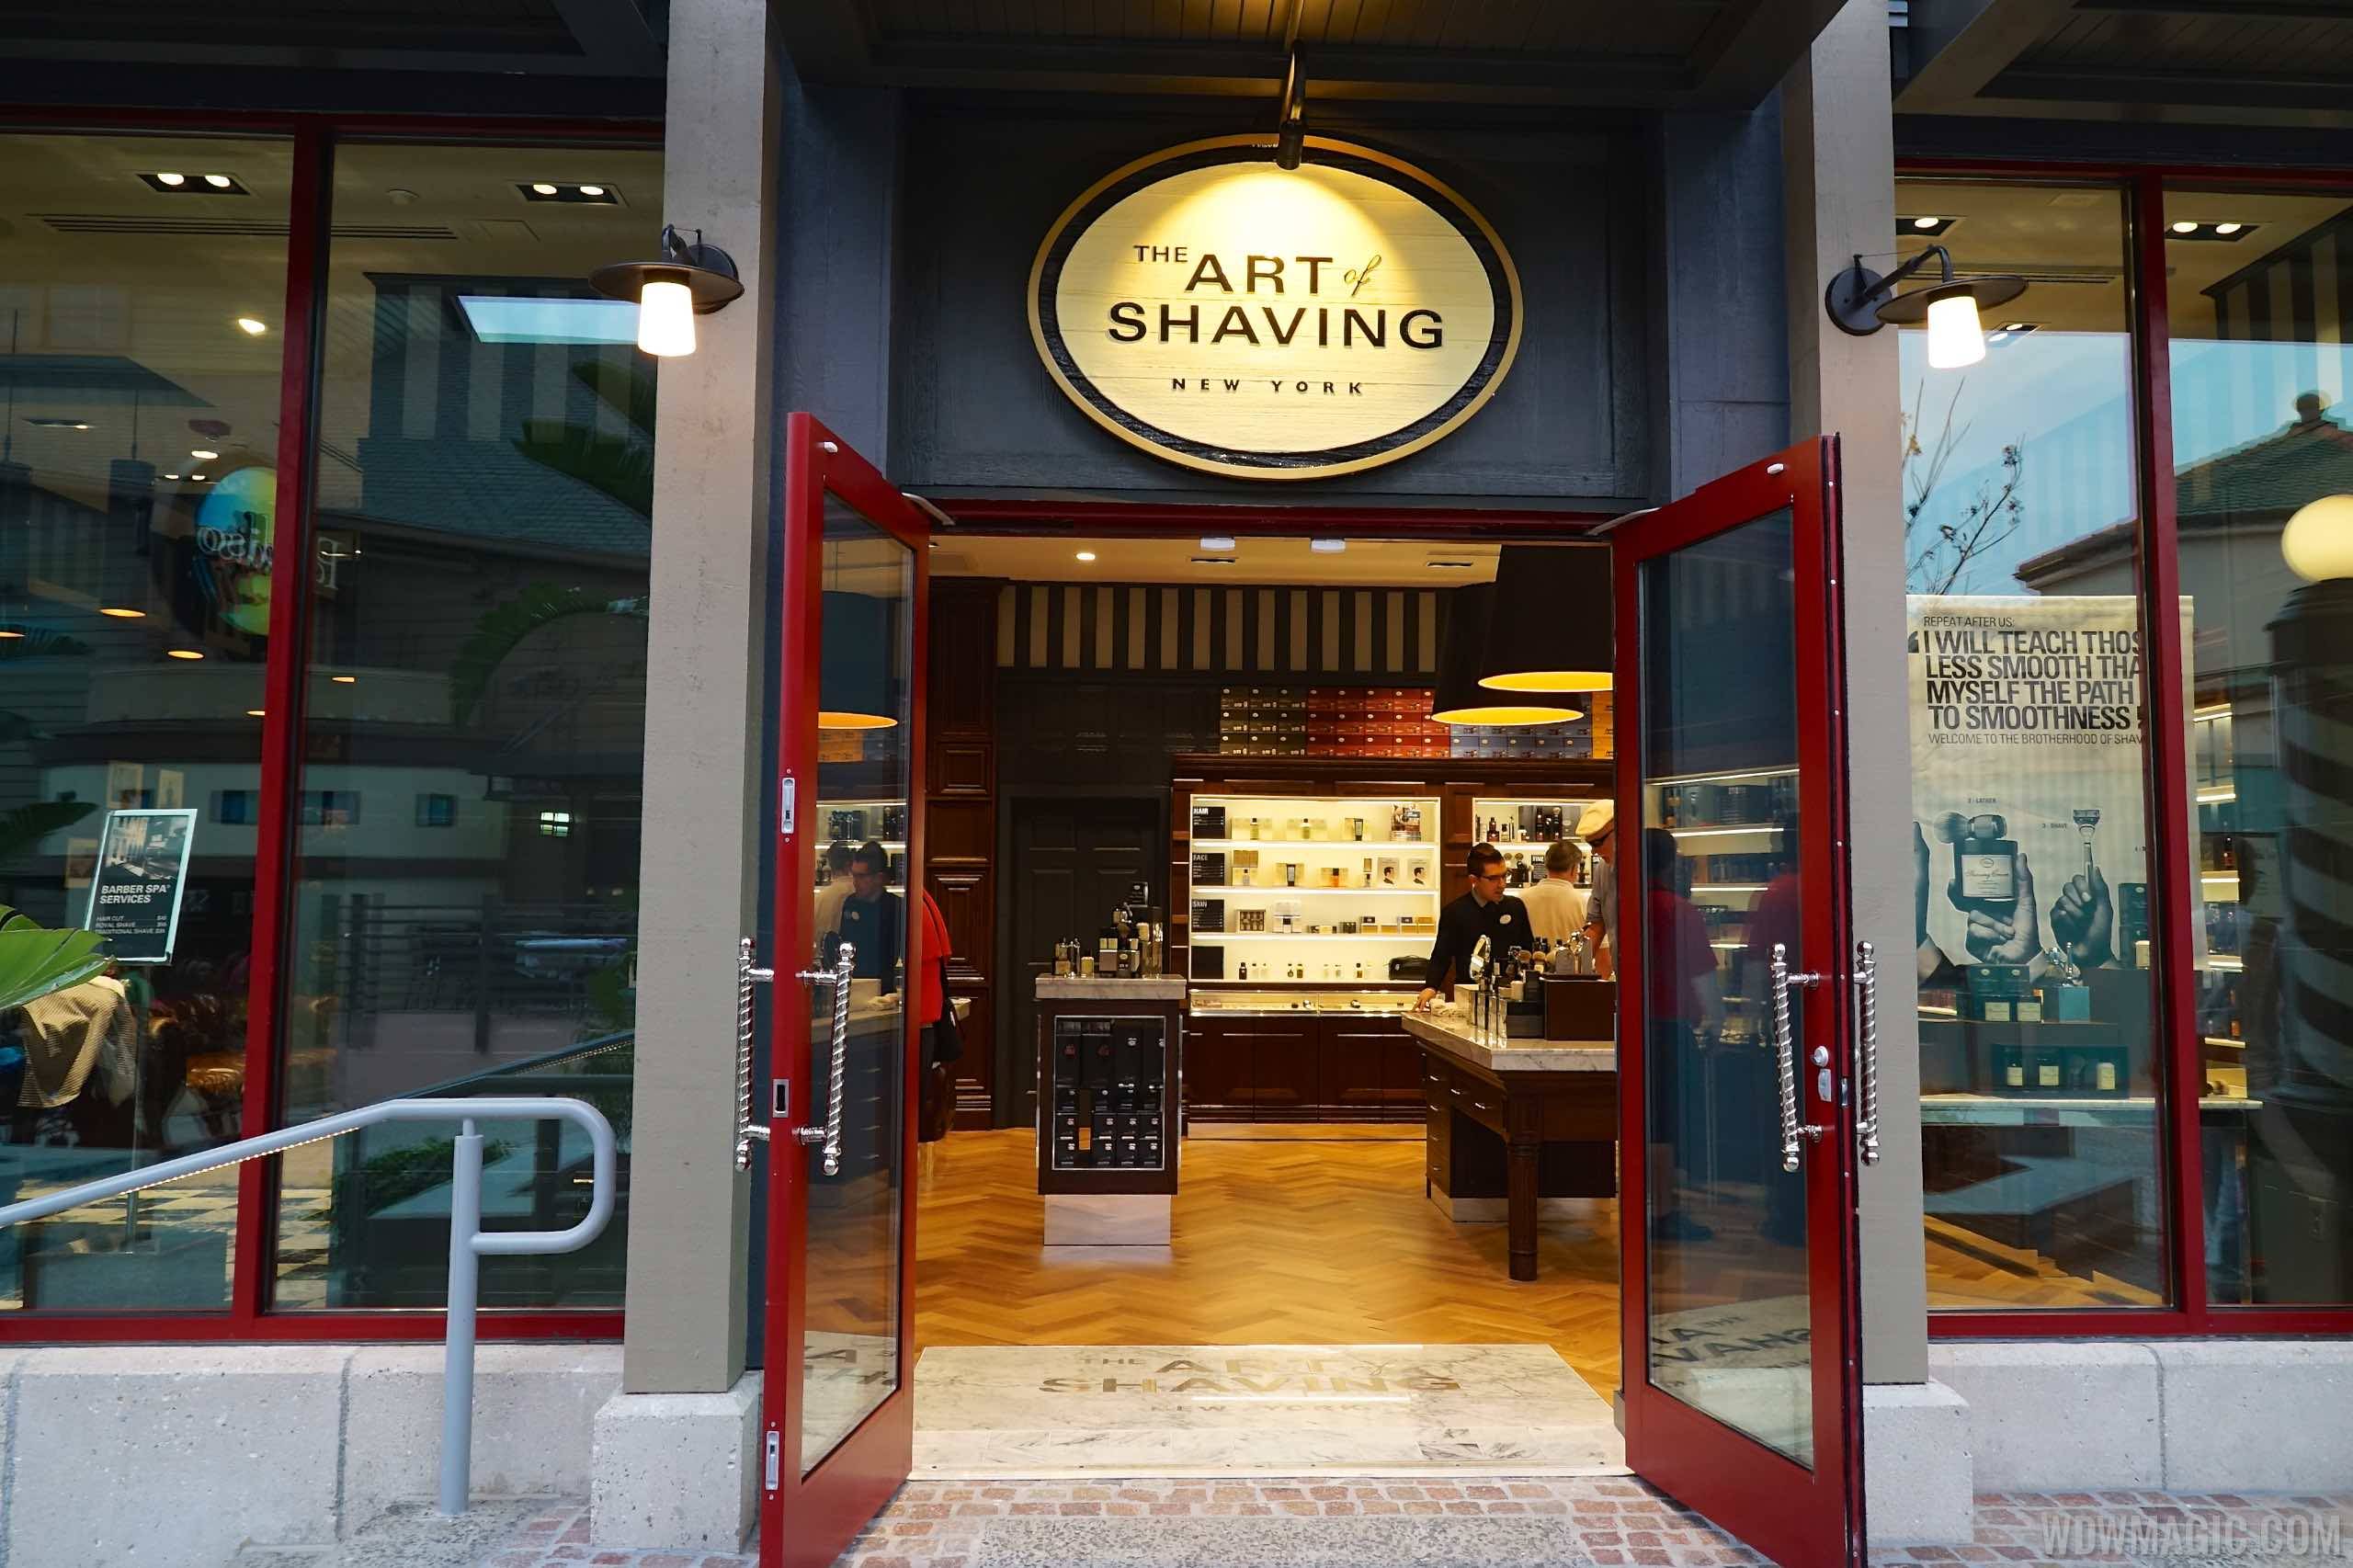 PHOTOS - The Art of Shaving opens at Disney Springs